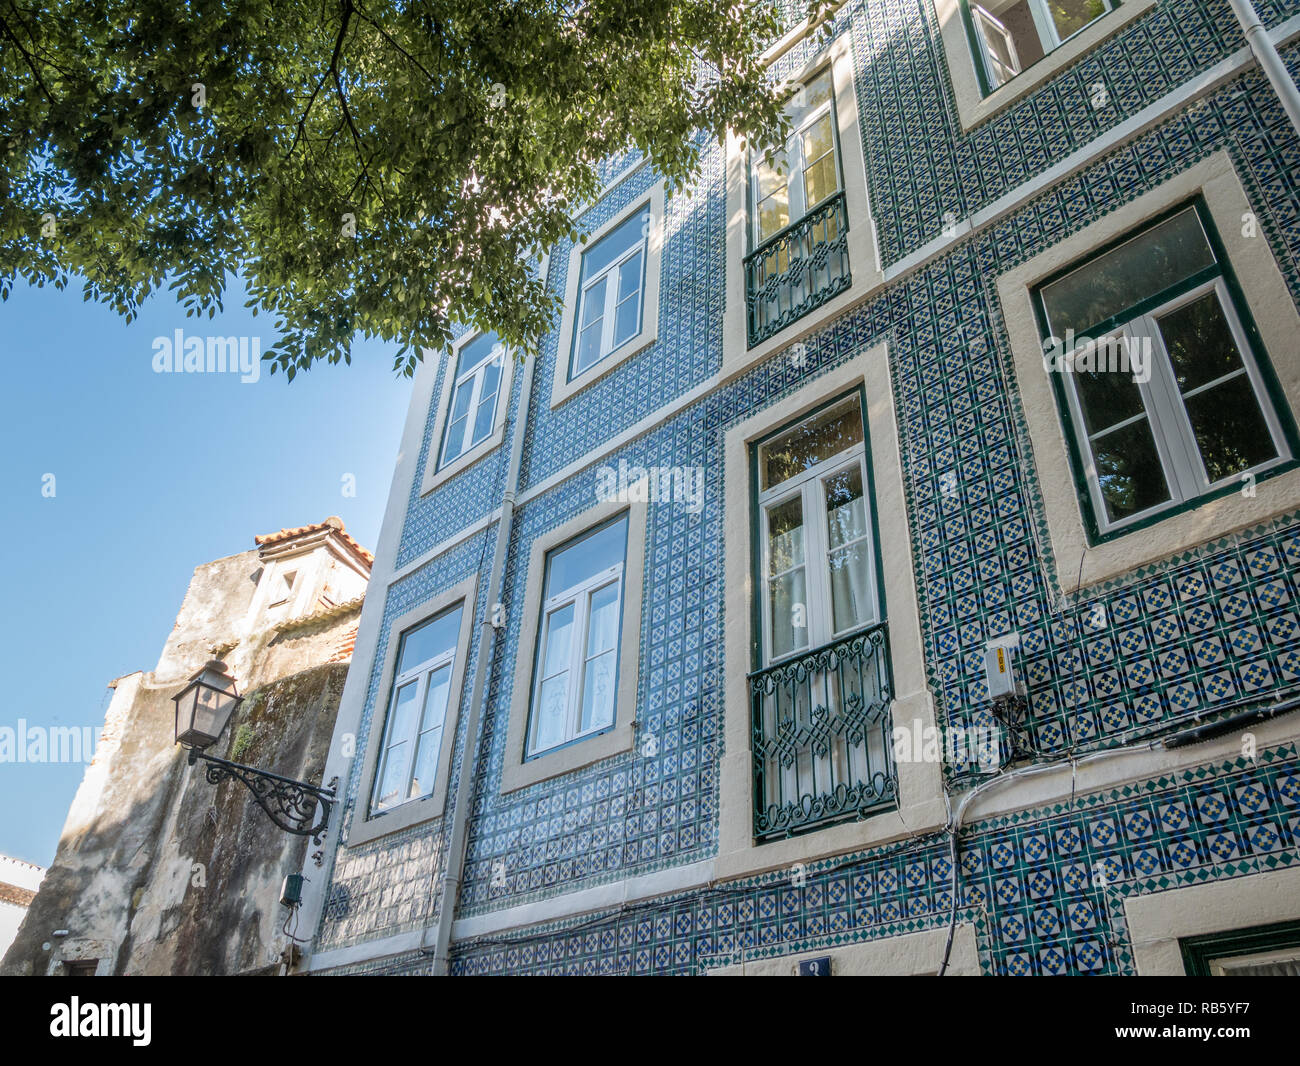 Lisbon, Portugal - May 27th 2018: Typical tradtional portuguese facade with blue white tiles on a sunny day, Lisbon, Portugal Stock Photo